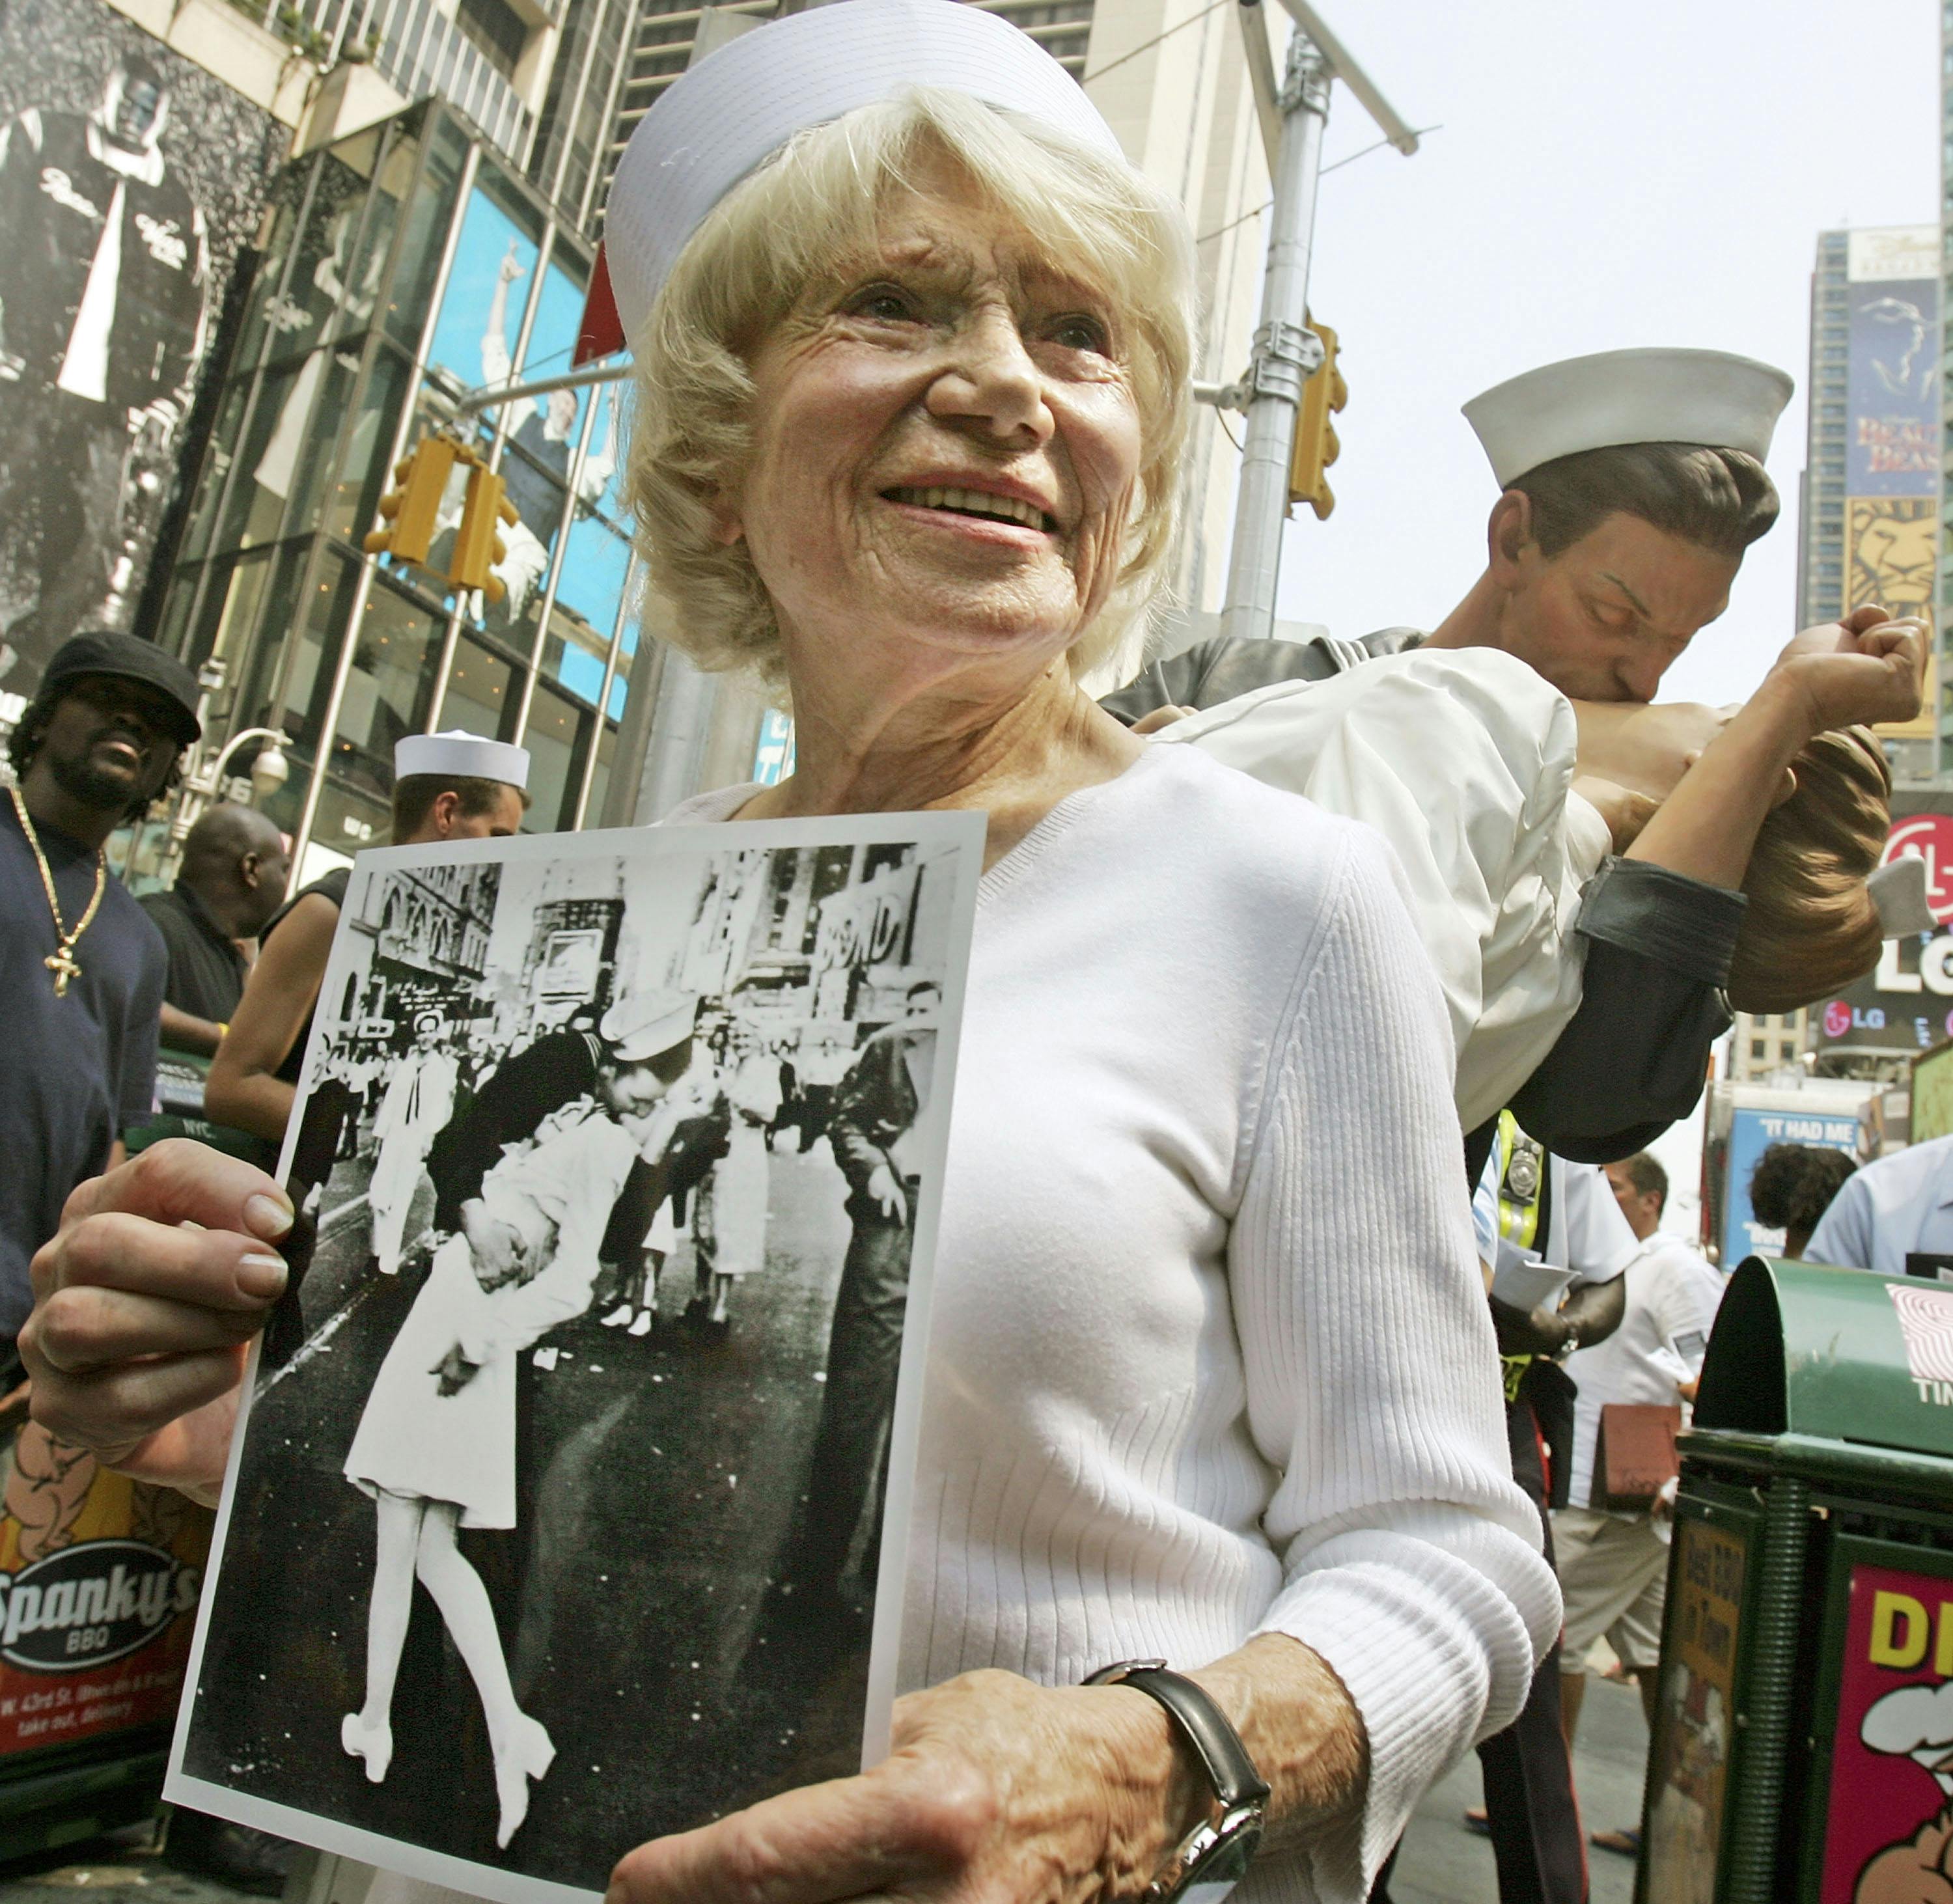 Eighty six-year-old Edith Shain stands in Times Square in front of a statue of her famous kiss with a sailor on V-J Day at the end of World War II August 11, 2005 in New York City. The famous kiss was photographed by Alfred Eisenstaedt and the unveiling of the statue coincides with the 60th anniversary of the end of World War II on August 14, 1945. The sailor in the photograph has never been positively identified. 